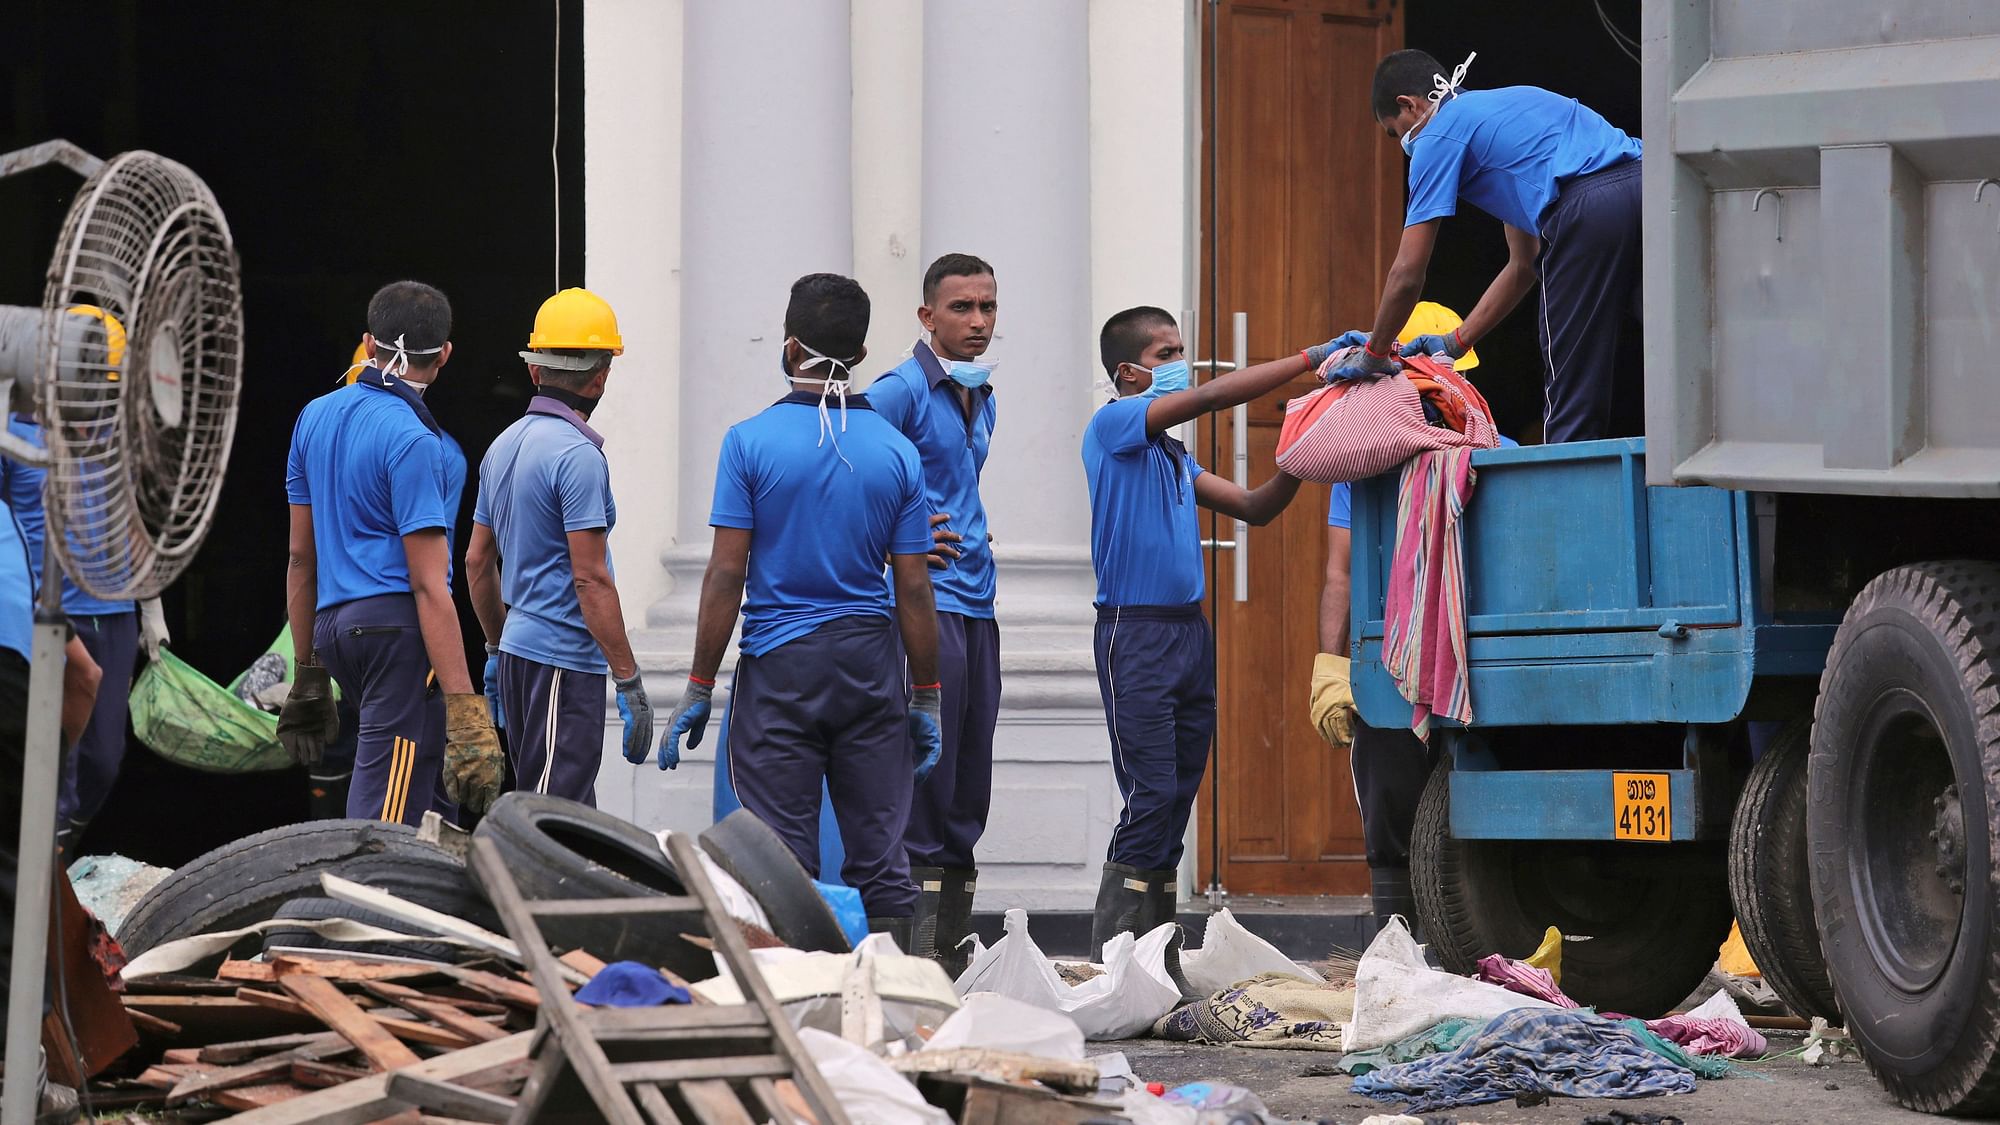 Sri Lankan security forces have found 15 bodies, including six children, after militants linked to the Easter bombings set off explosives during a raid on their house.